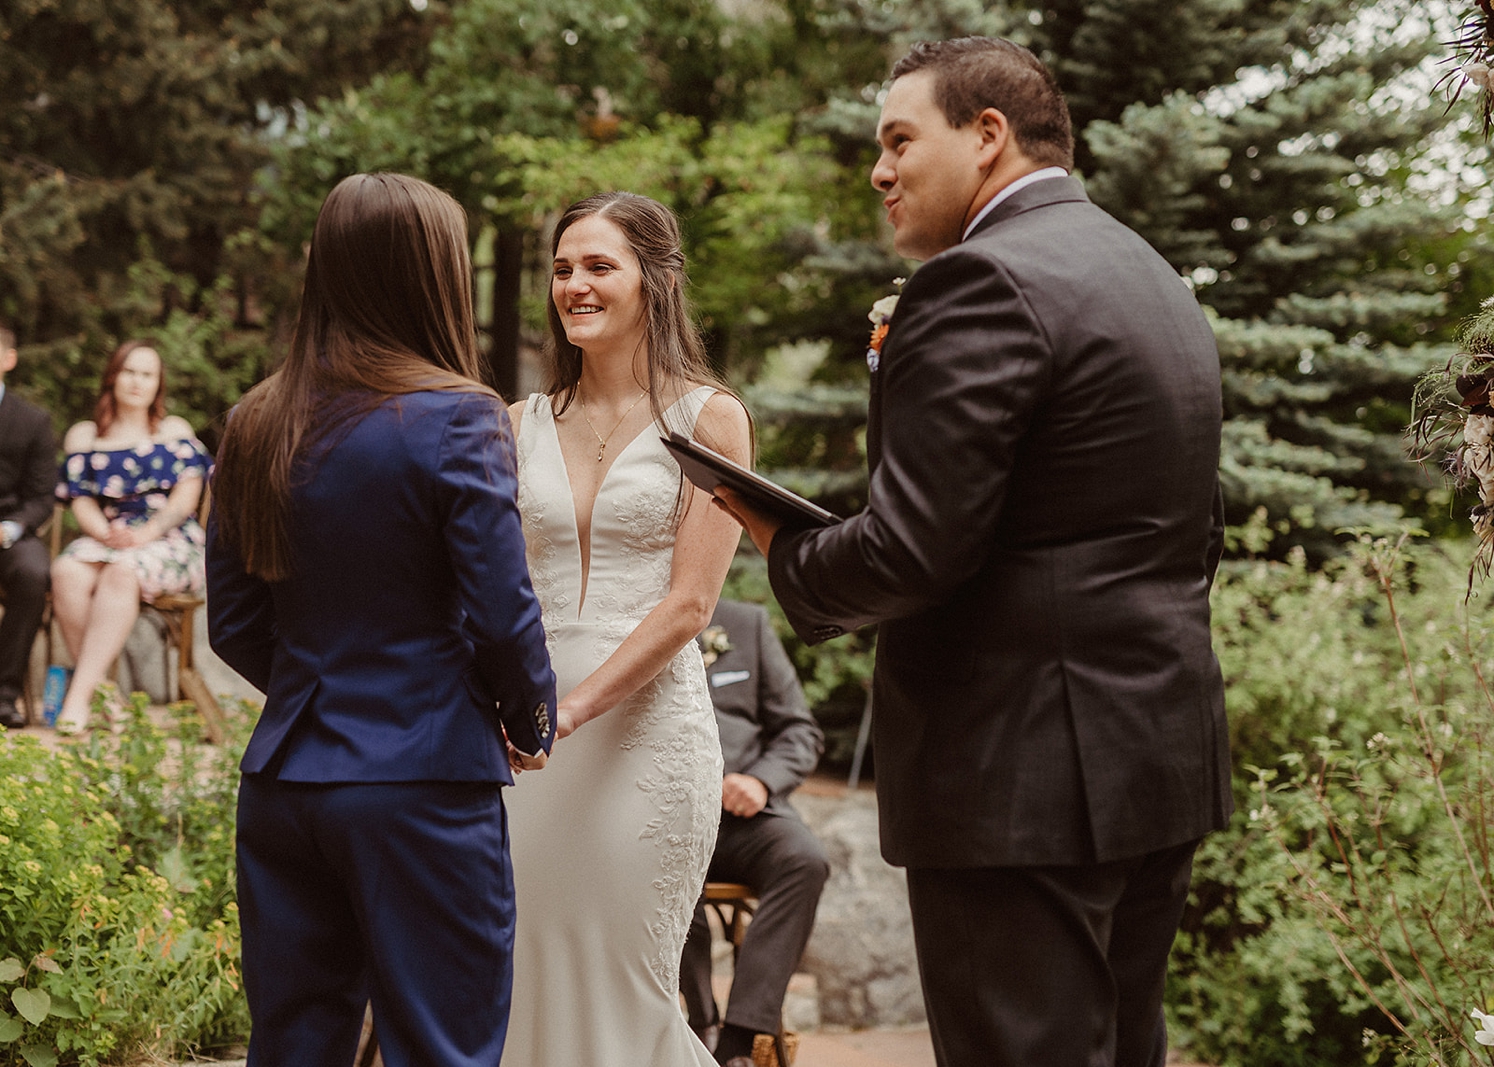 Couple holding hands during ceremony at Colorado Airbnb wedding | McArthur Weddings and Events